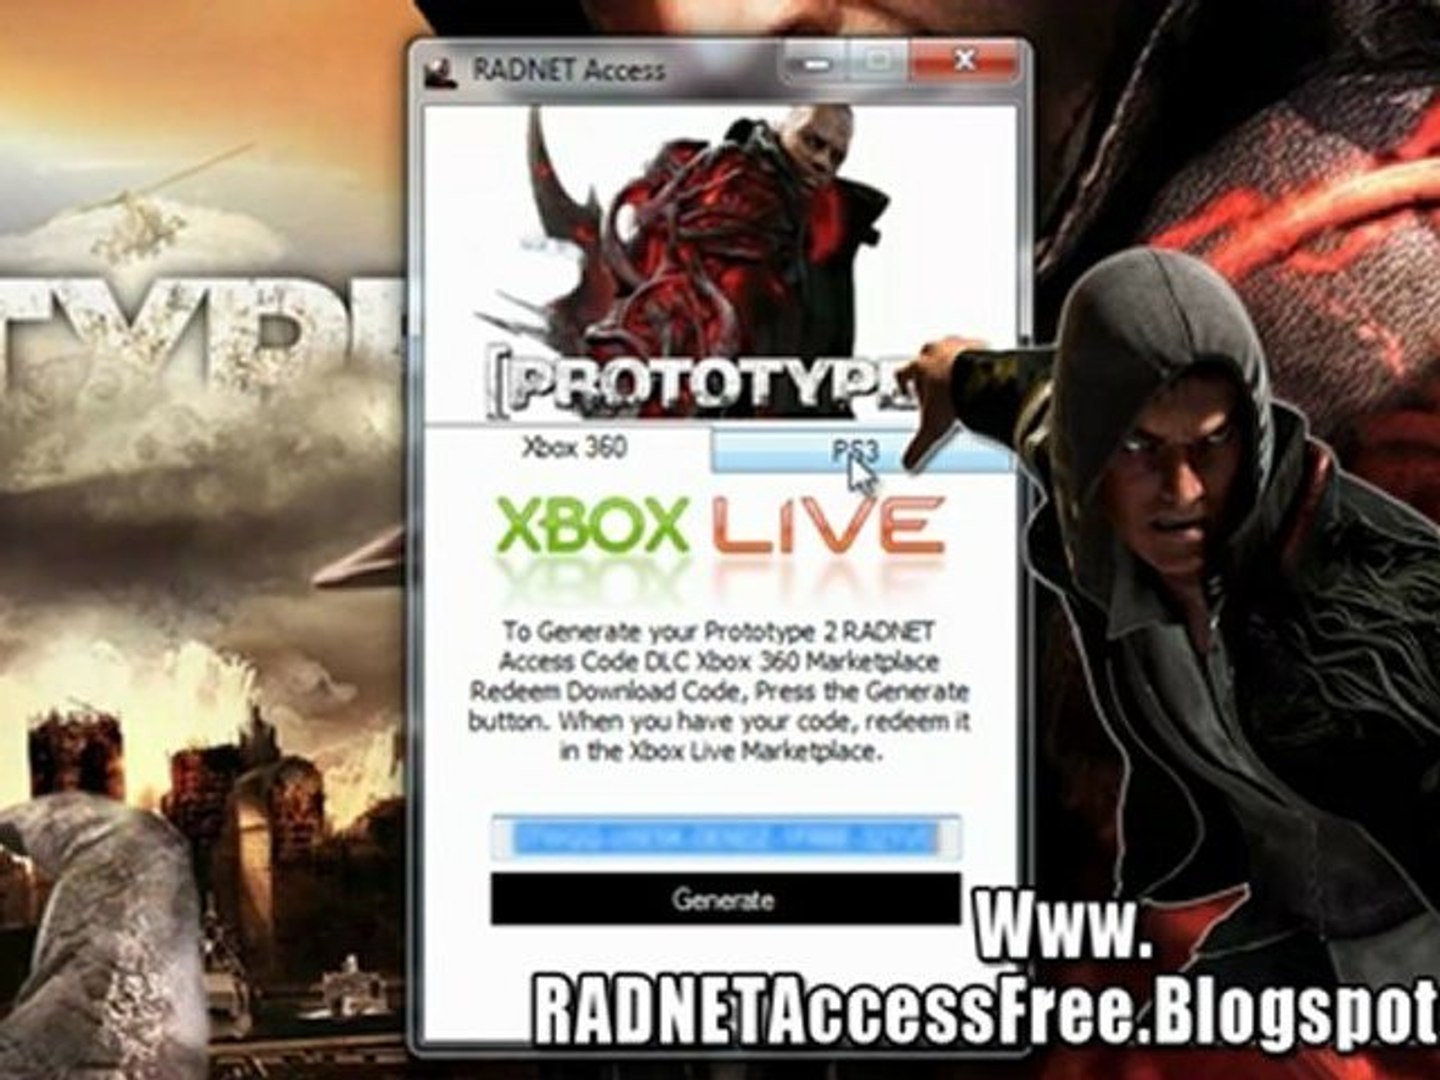 Get Free Prototype 2 RADNET Access DLC - Xbox 360 - PS3 - video Dailymotion